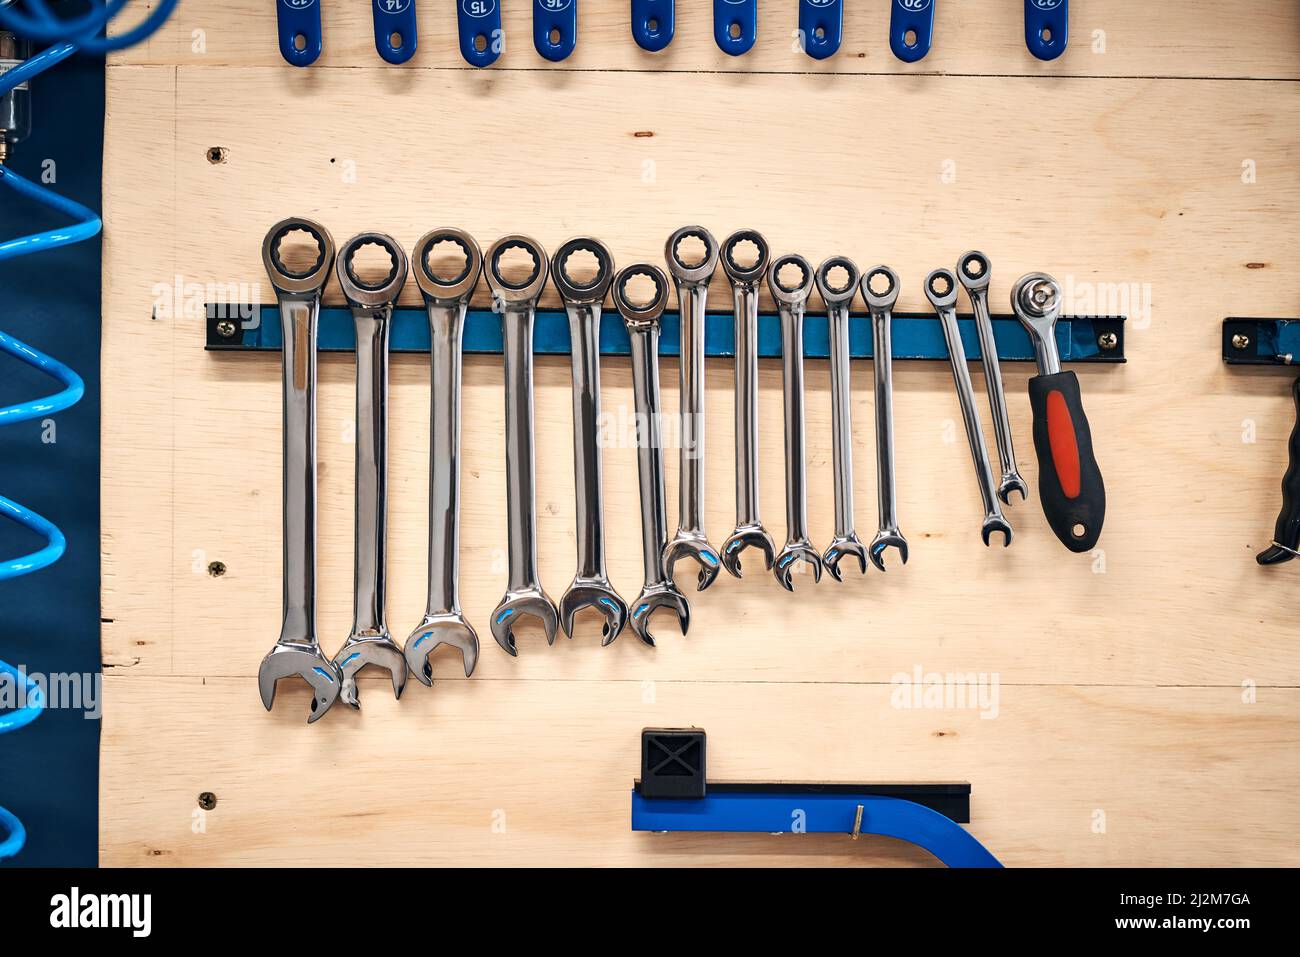 Just waiting to get fixing. Shot of tools in a workshop. Stock Photo